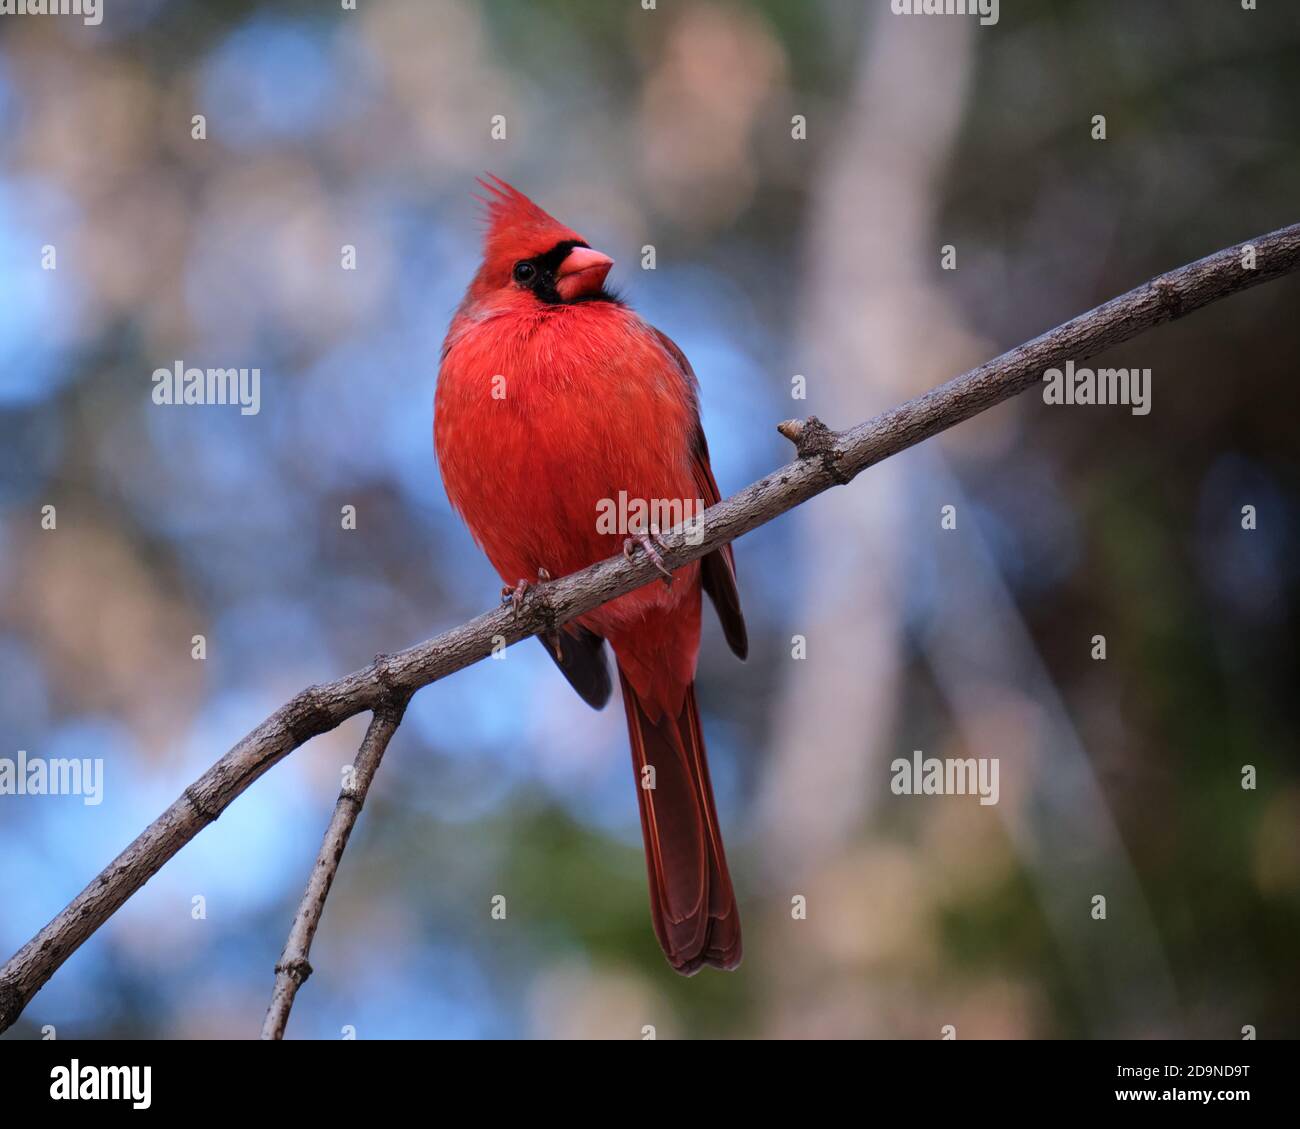 Male Northern Cardinal frontal perched on a branch against blurred forest background Stock Photo